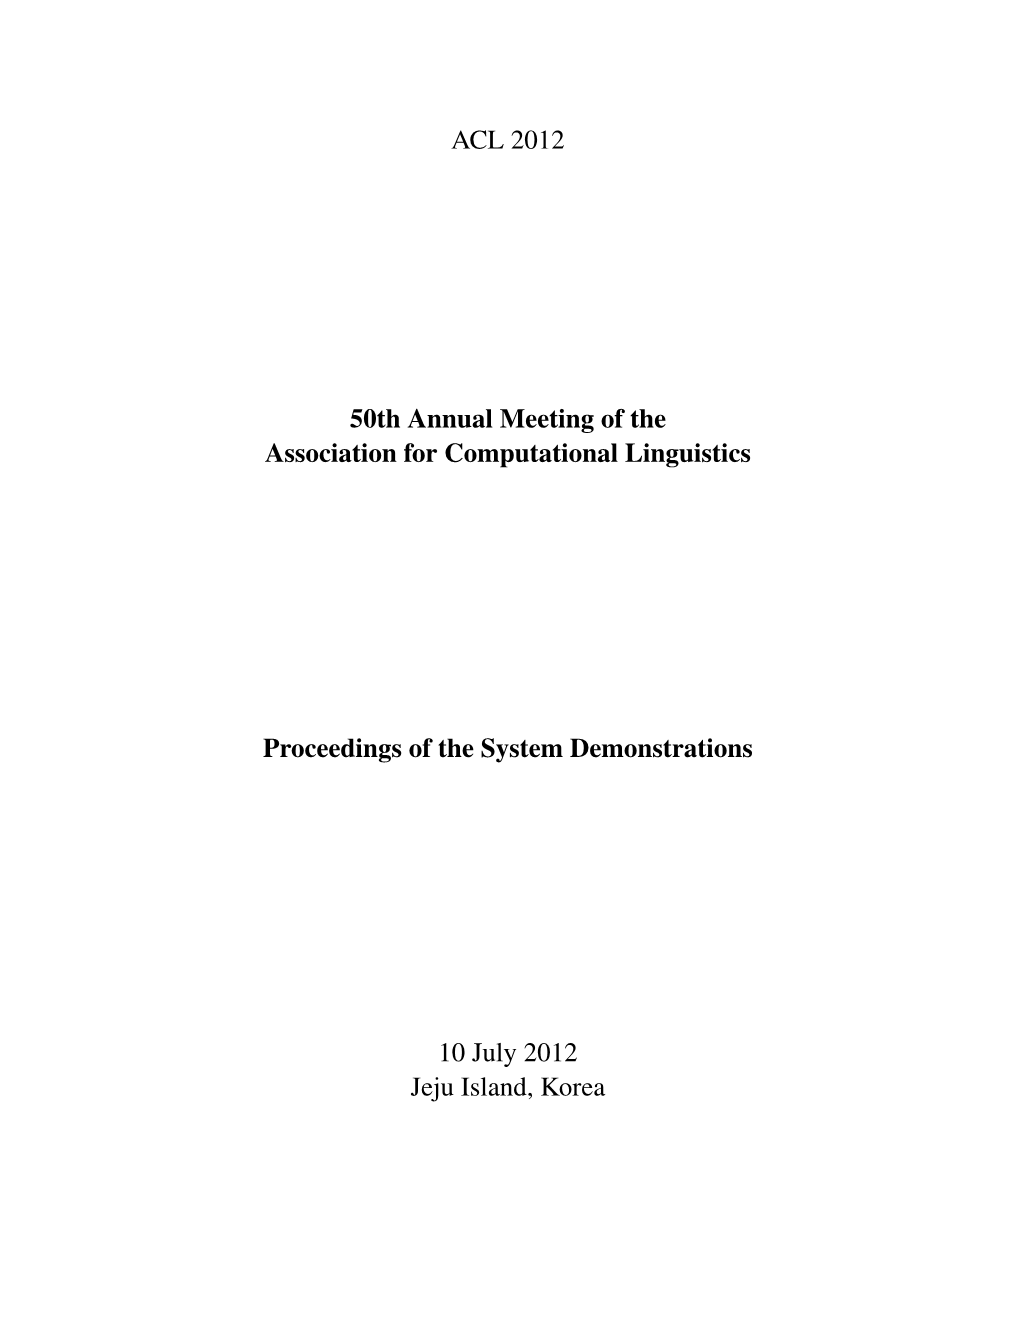 Proceedings of the ACL 2012 System Demonstrations